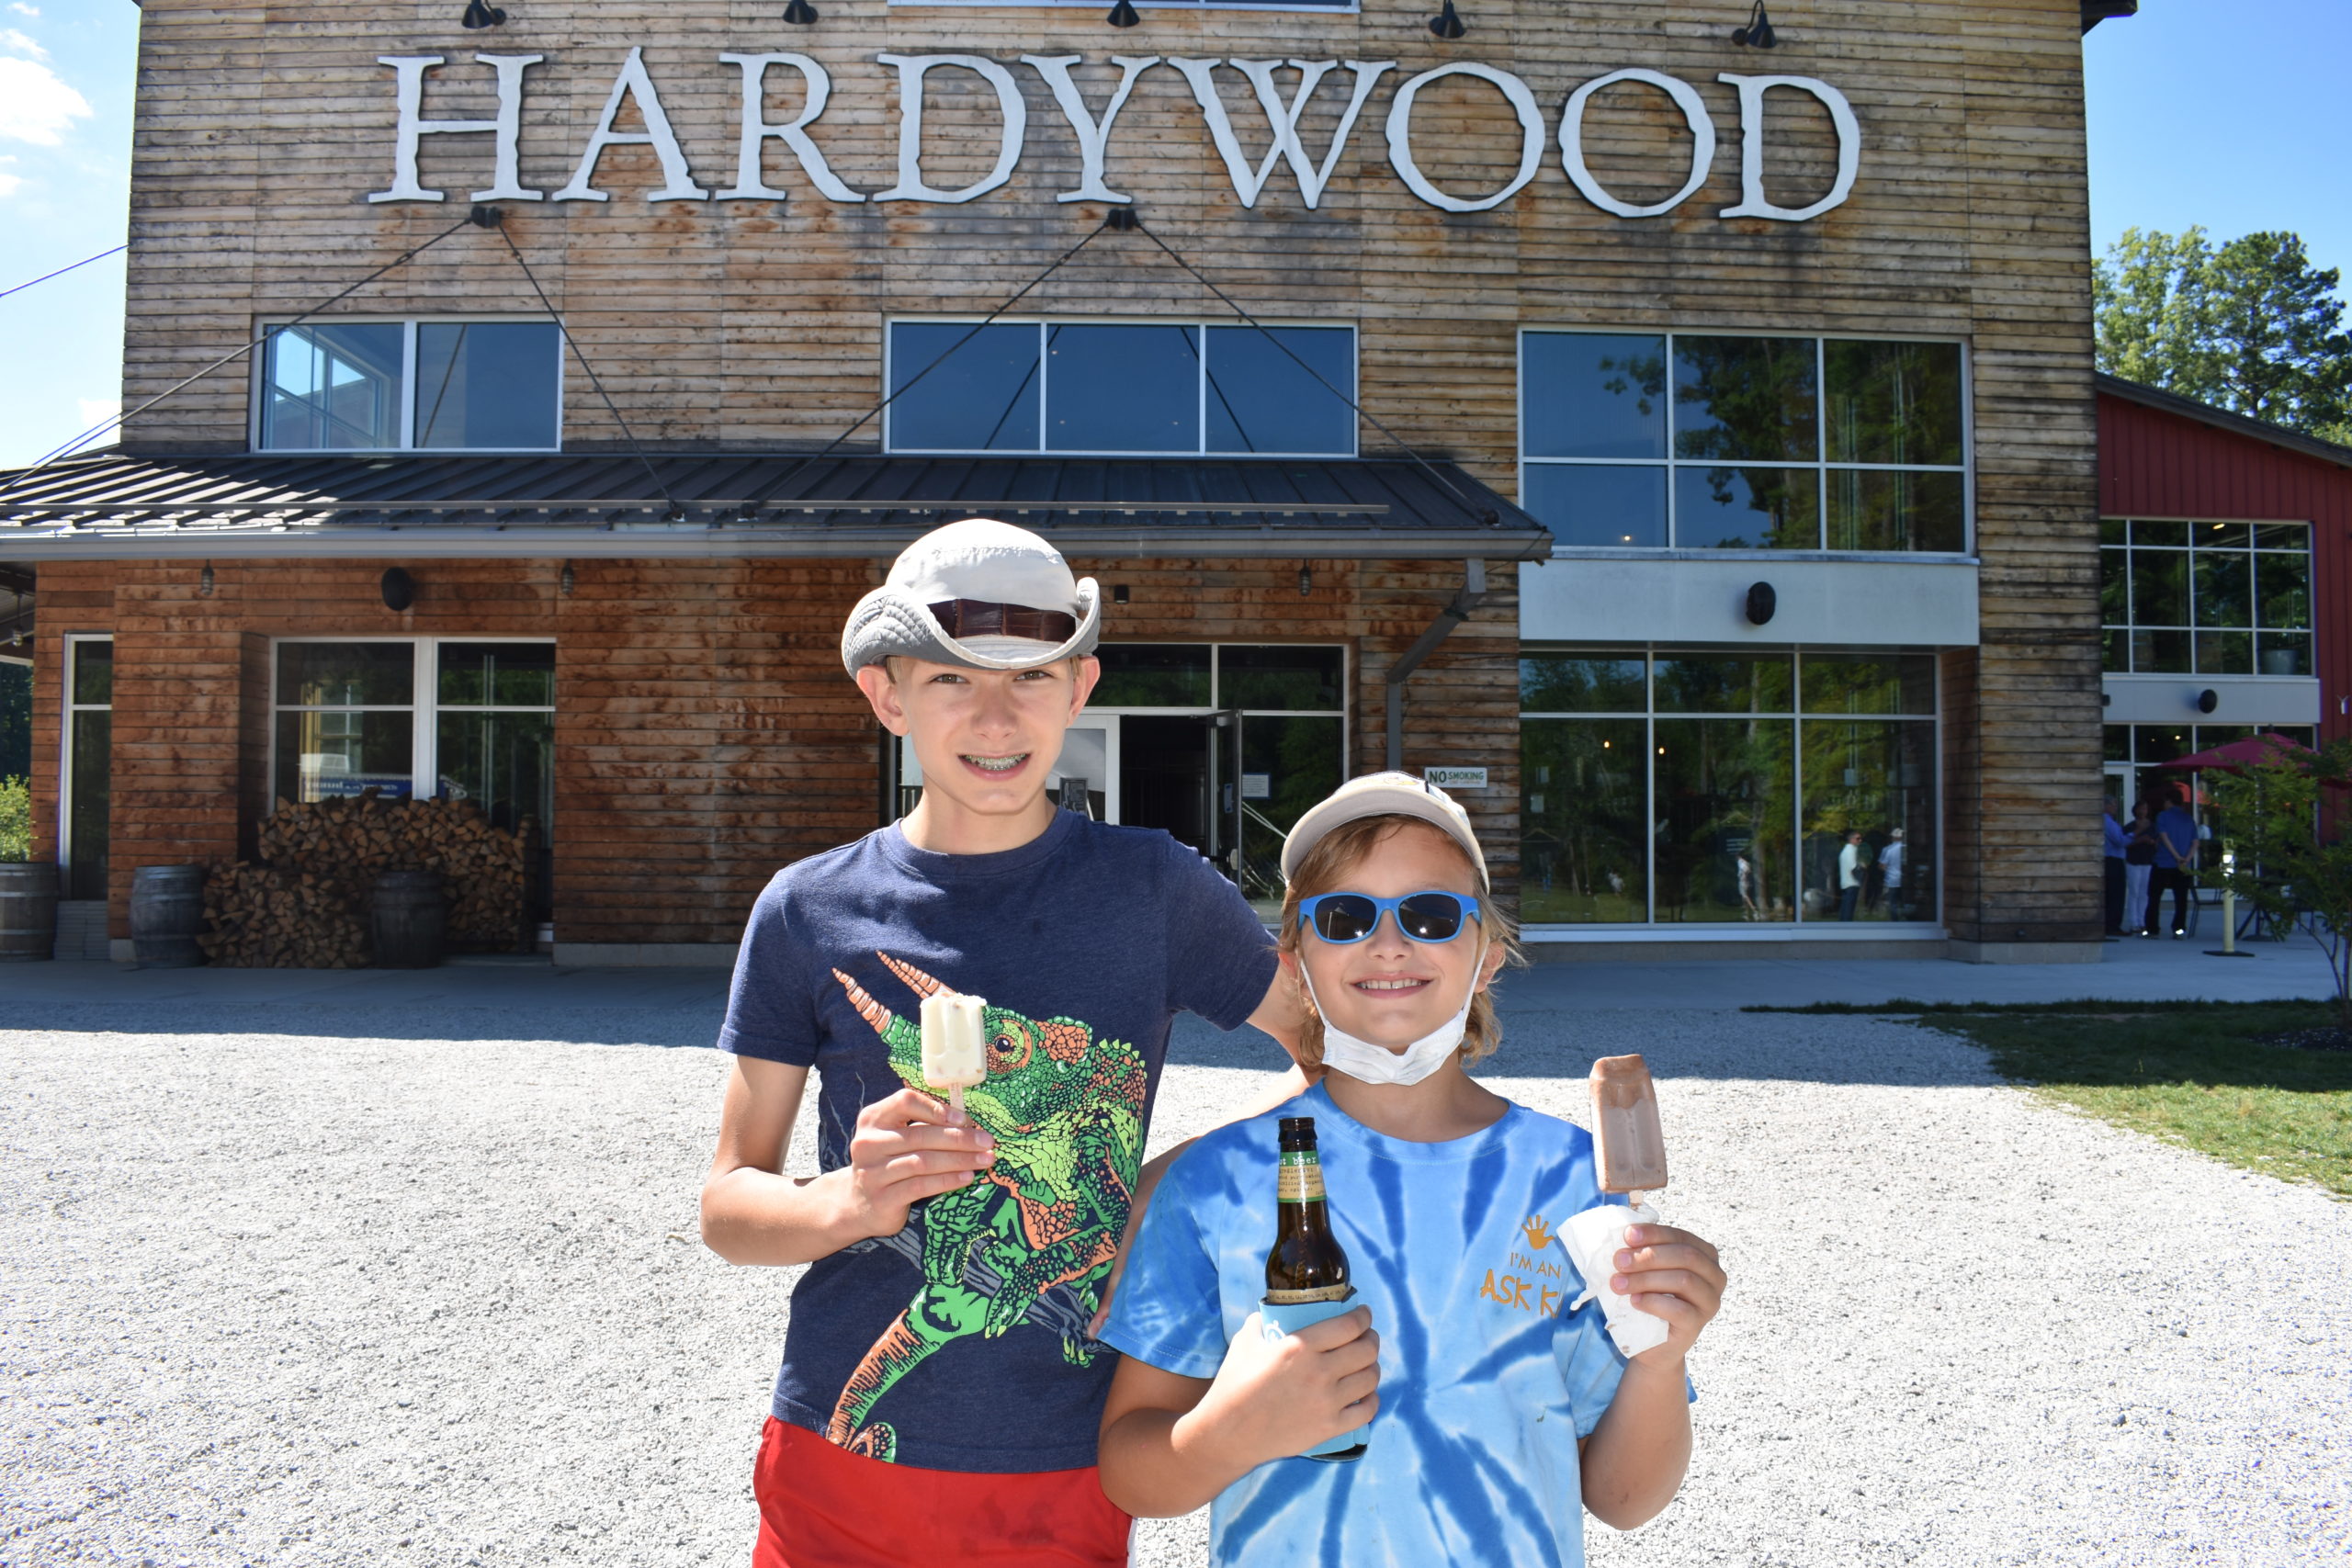 Image two children both wearing hats standing in front of the entrance of Hardywood